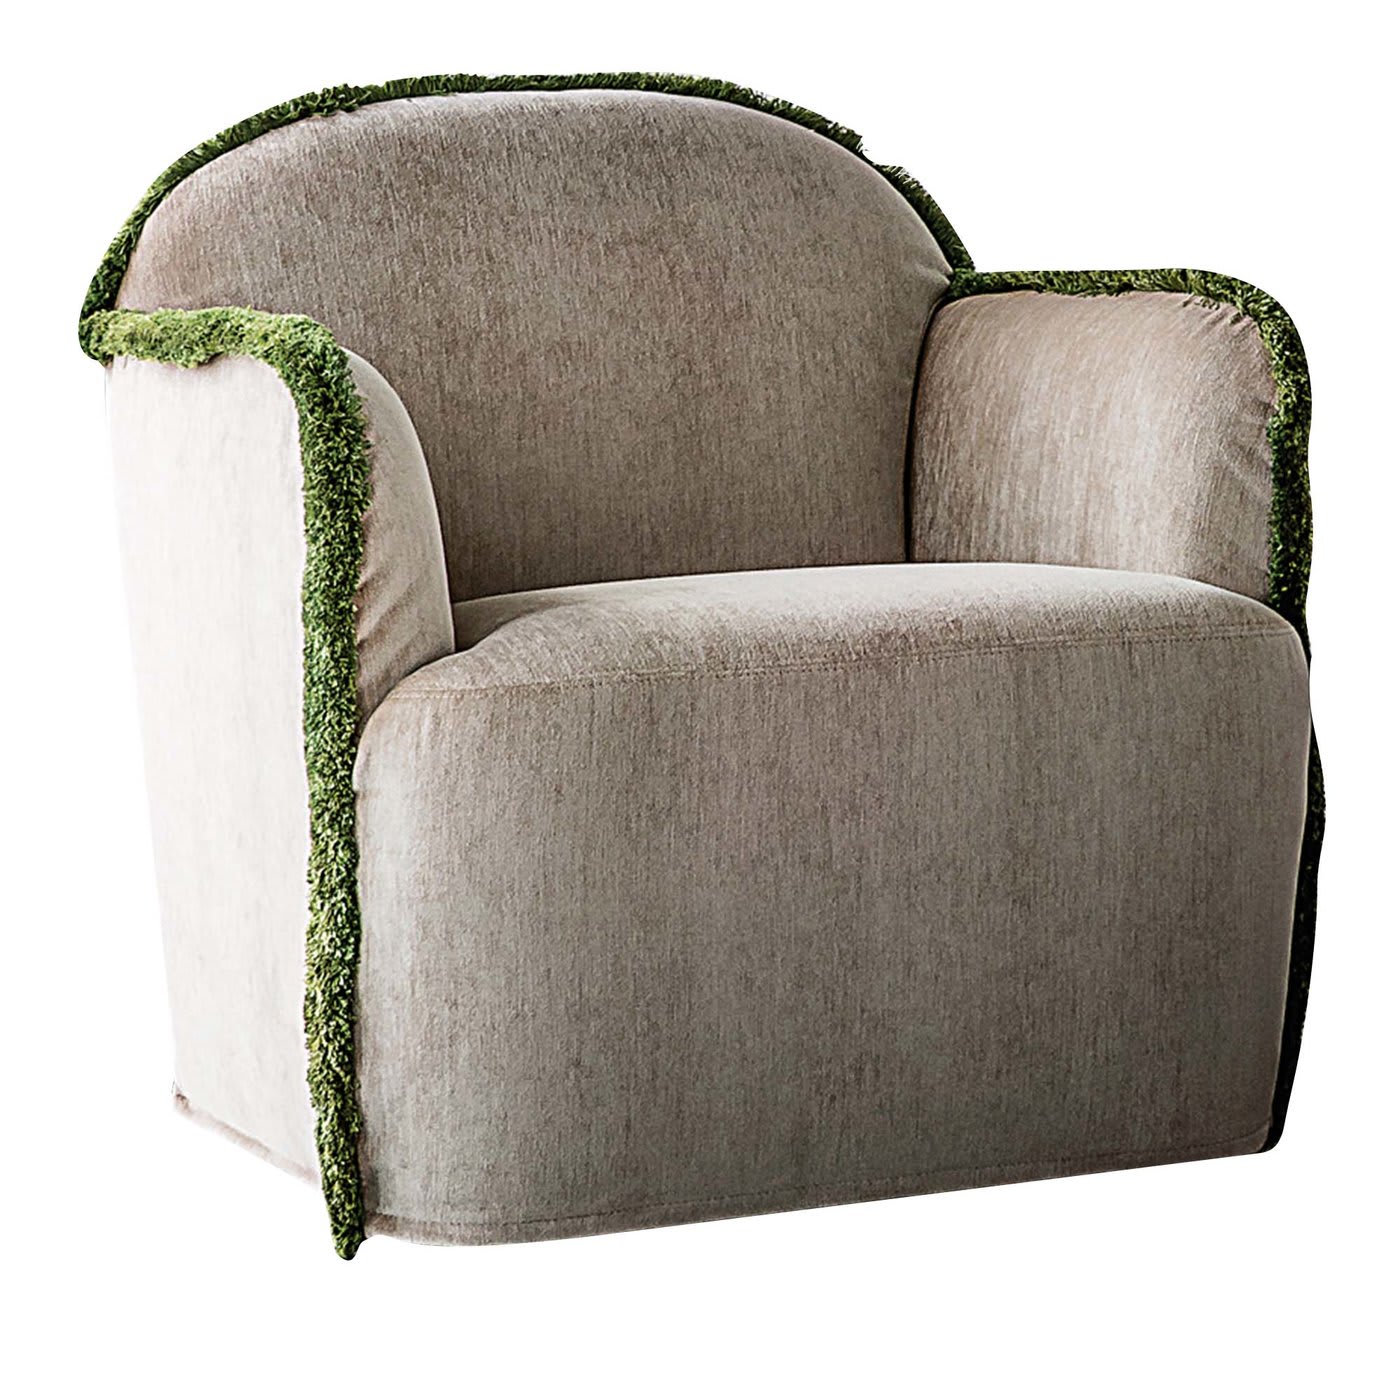 Ada Cream Armchair with Green Piping by Paola Navone - Casamilano